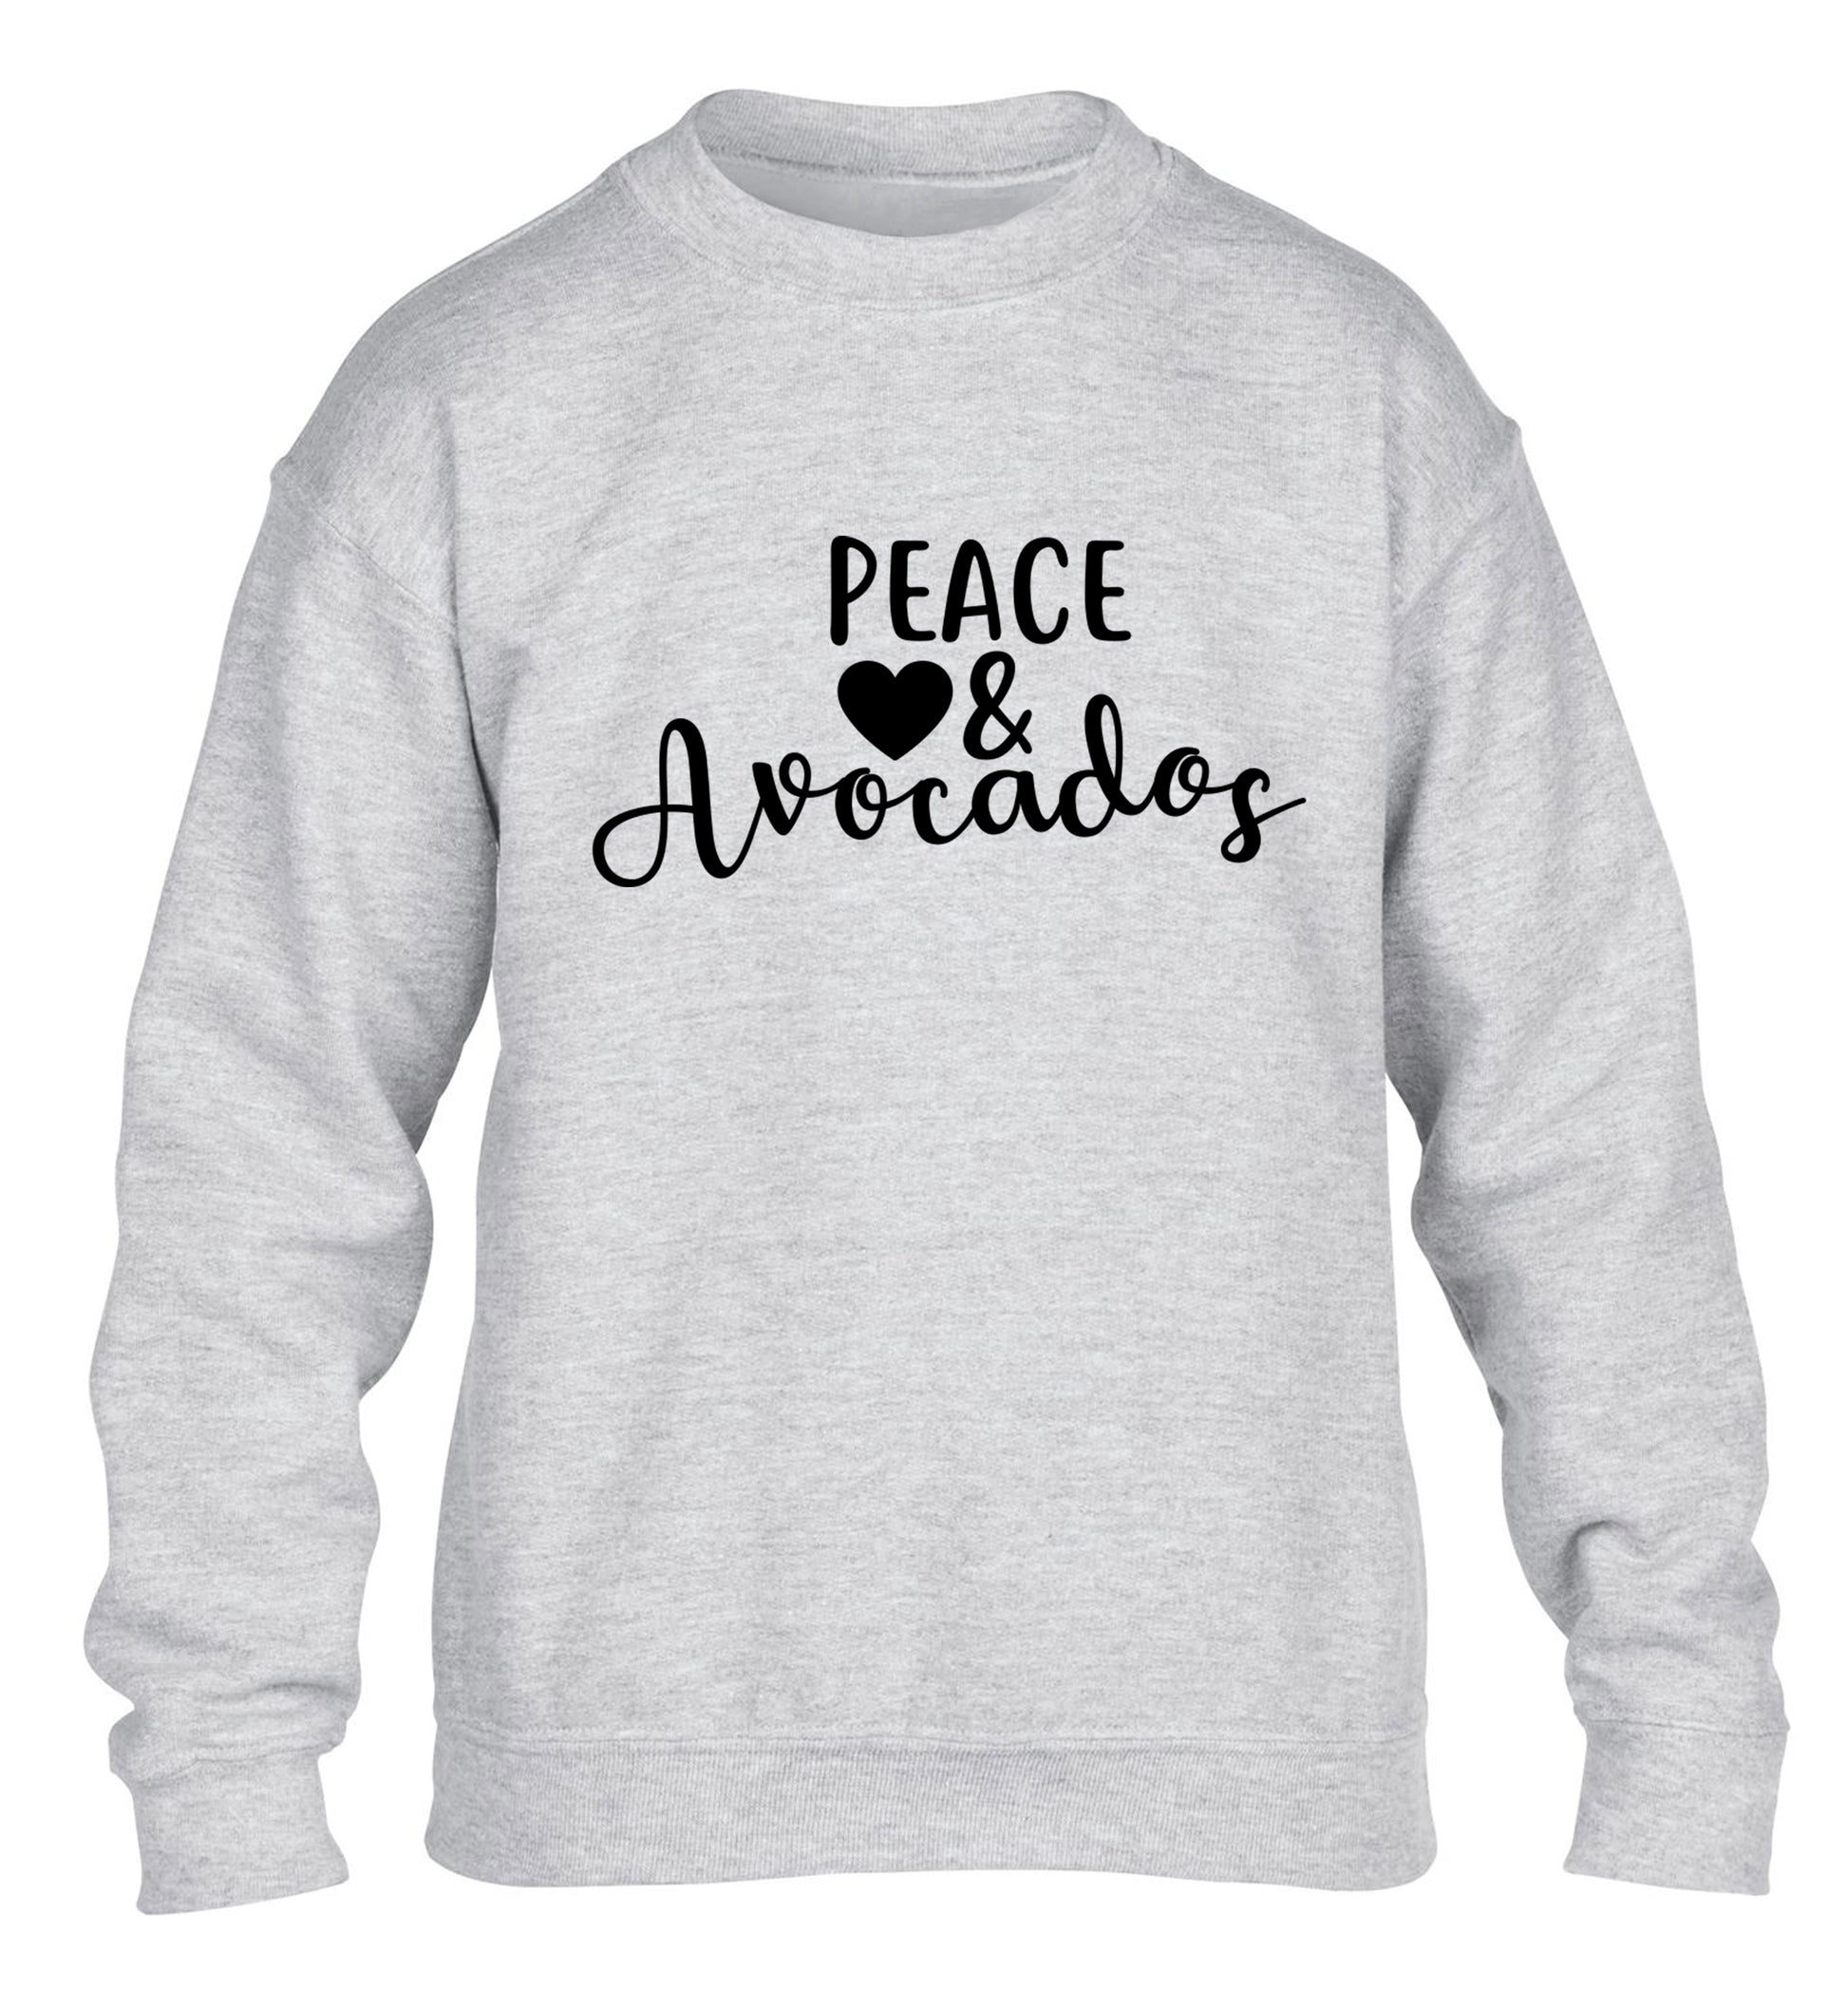 Peace love and avocados children's grey sweater 12-14 Years